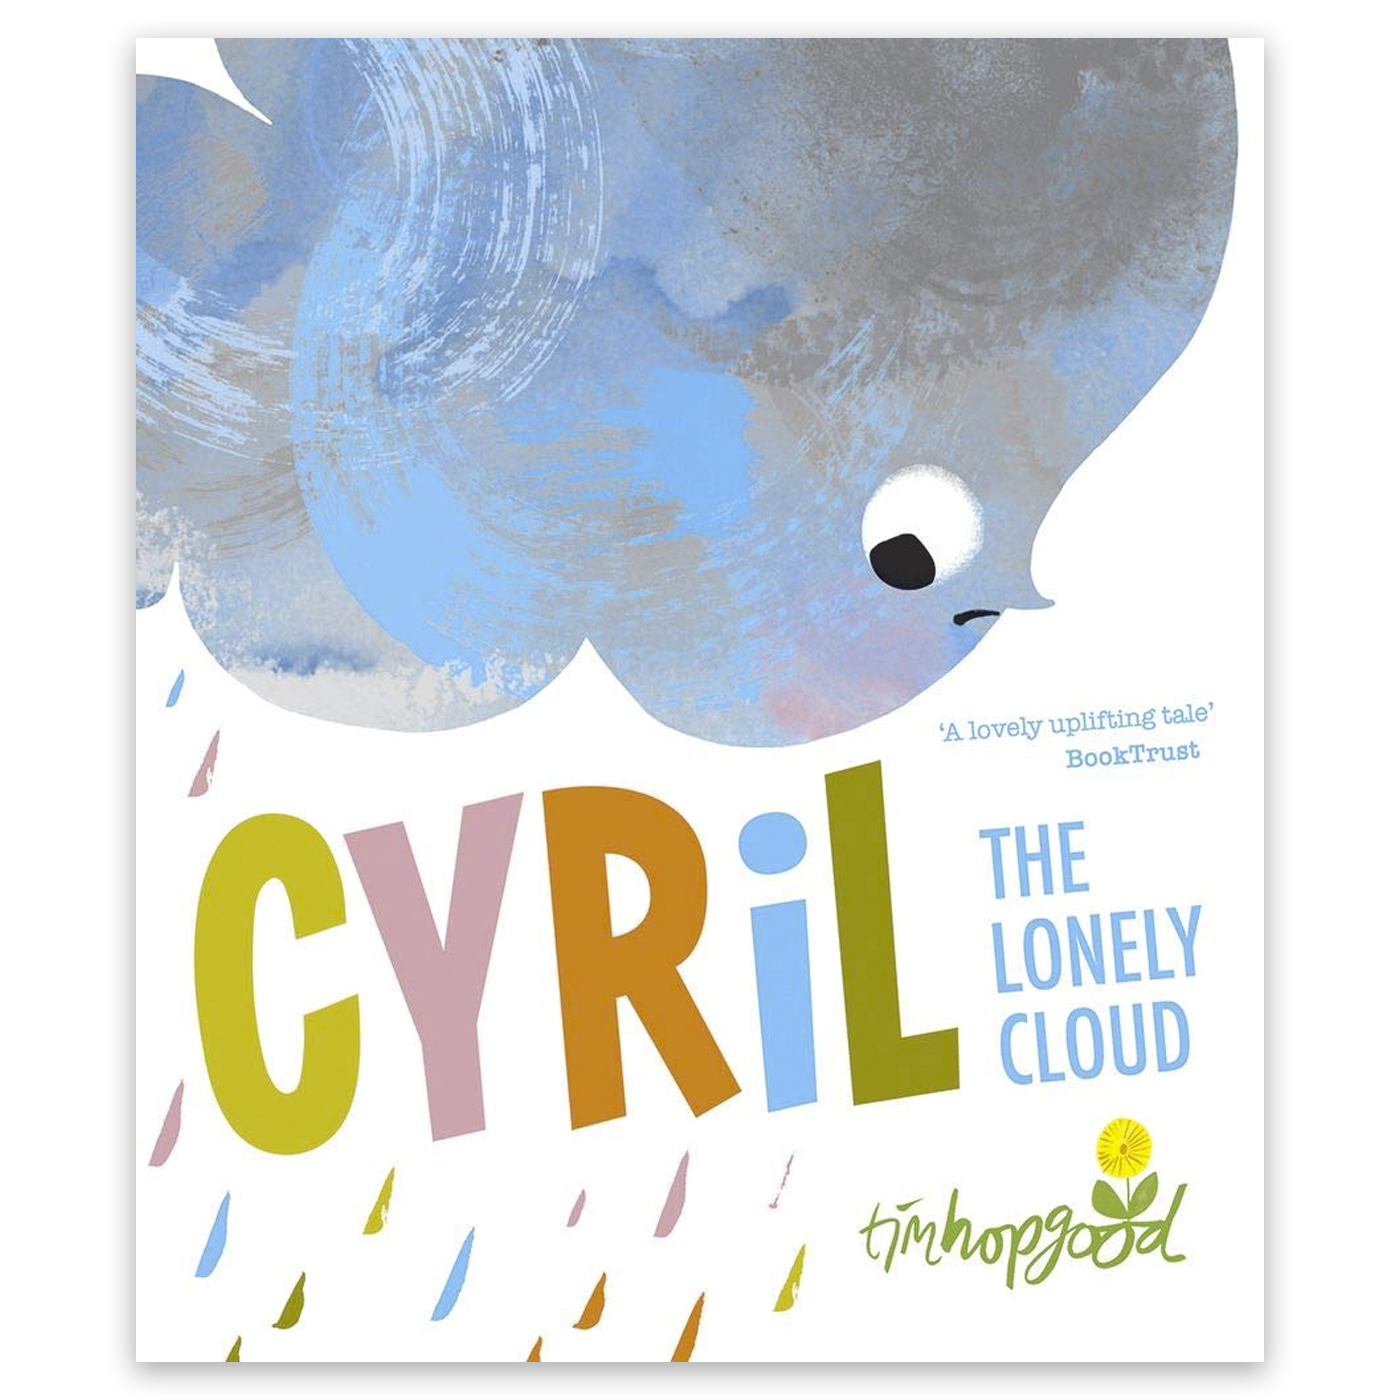  Cyril The Lonely Cloud